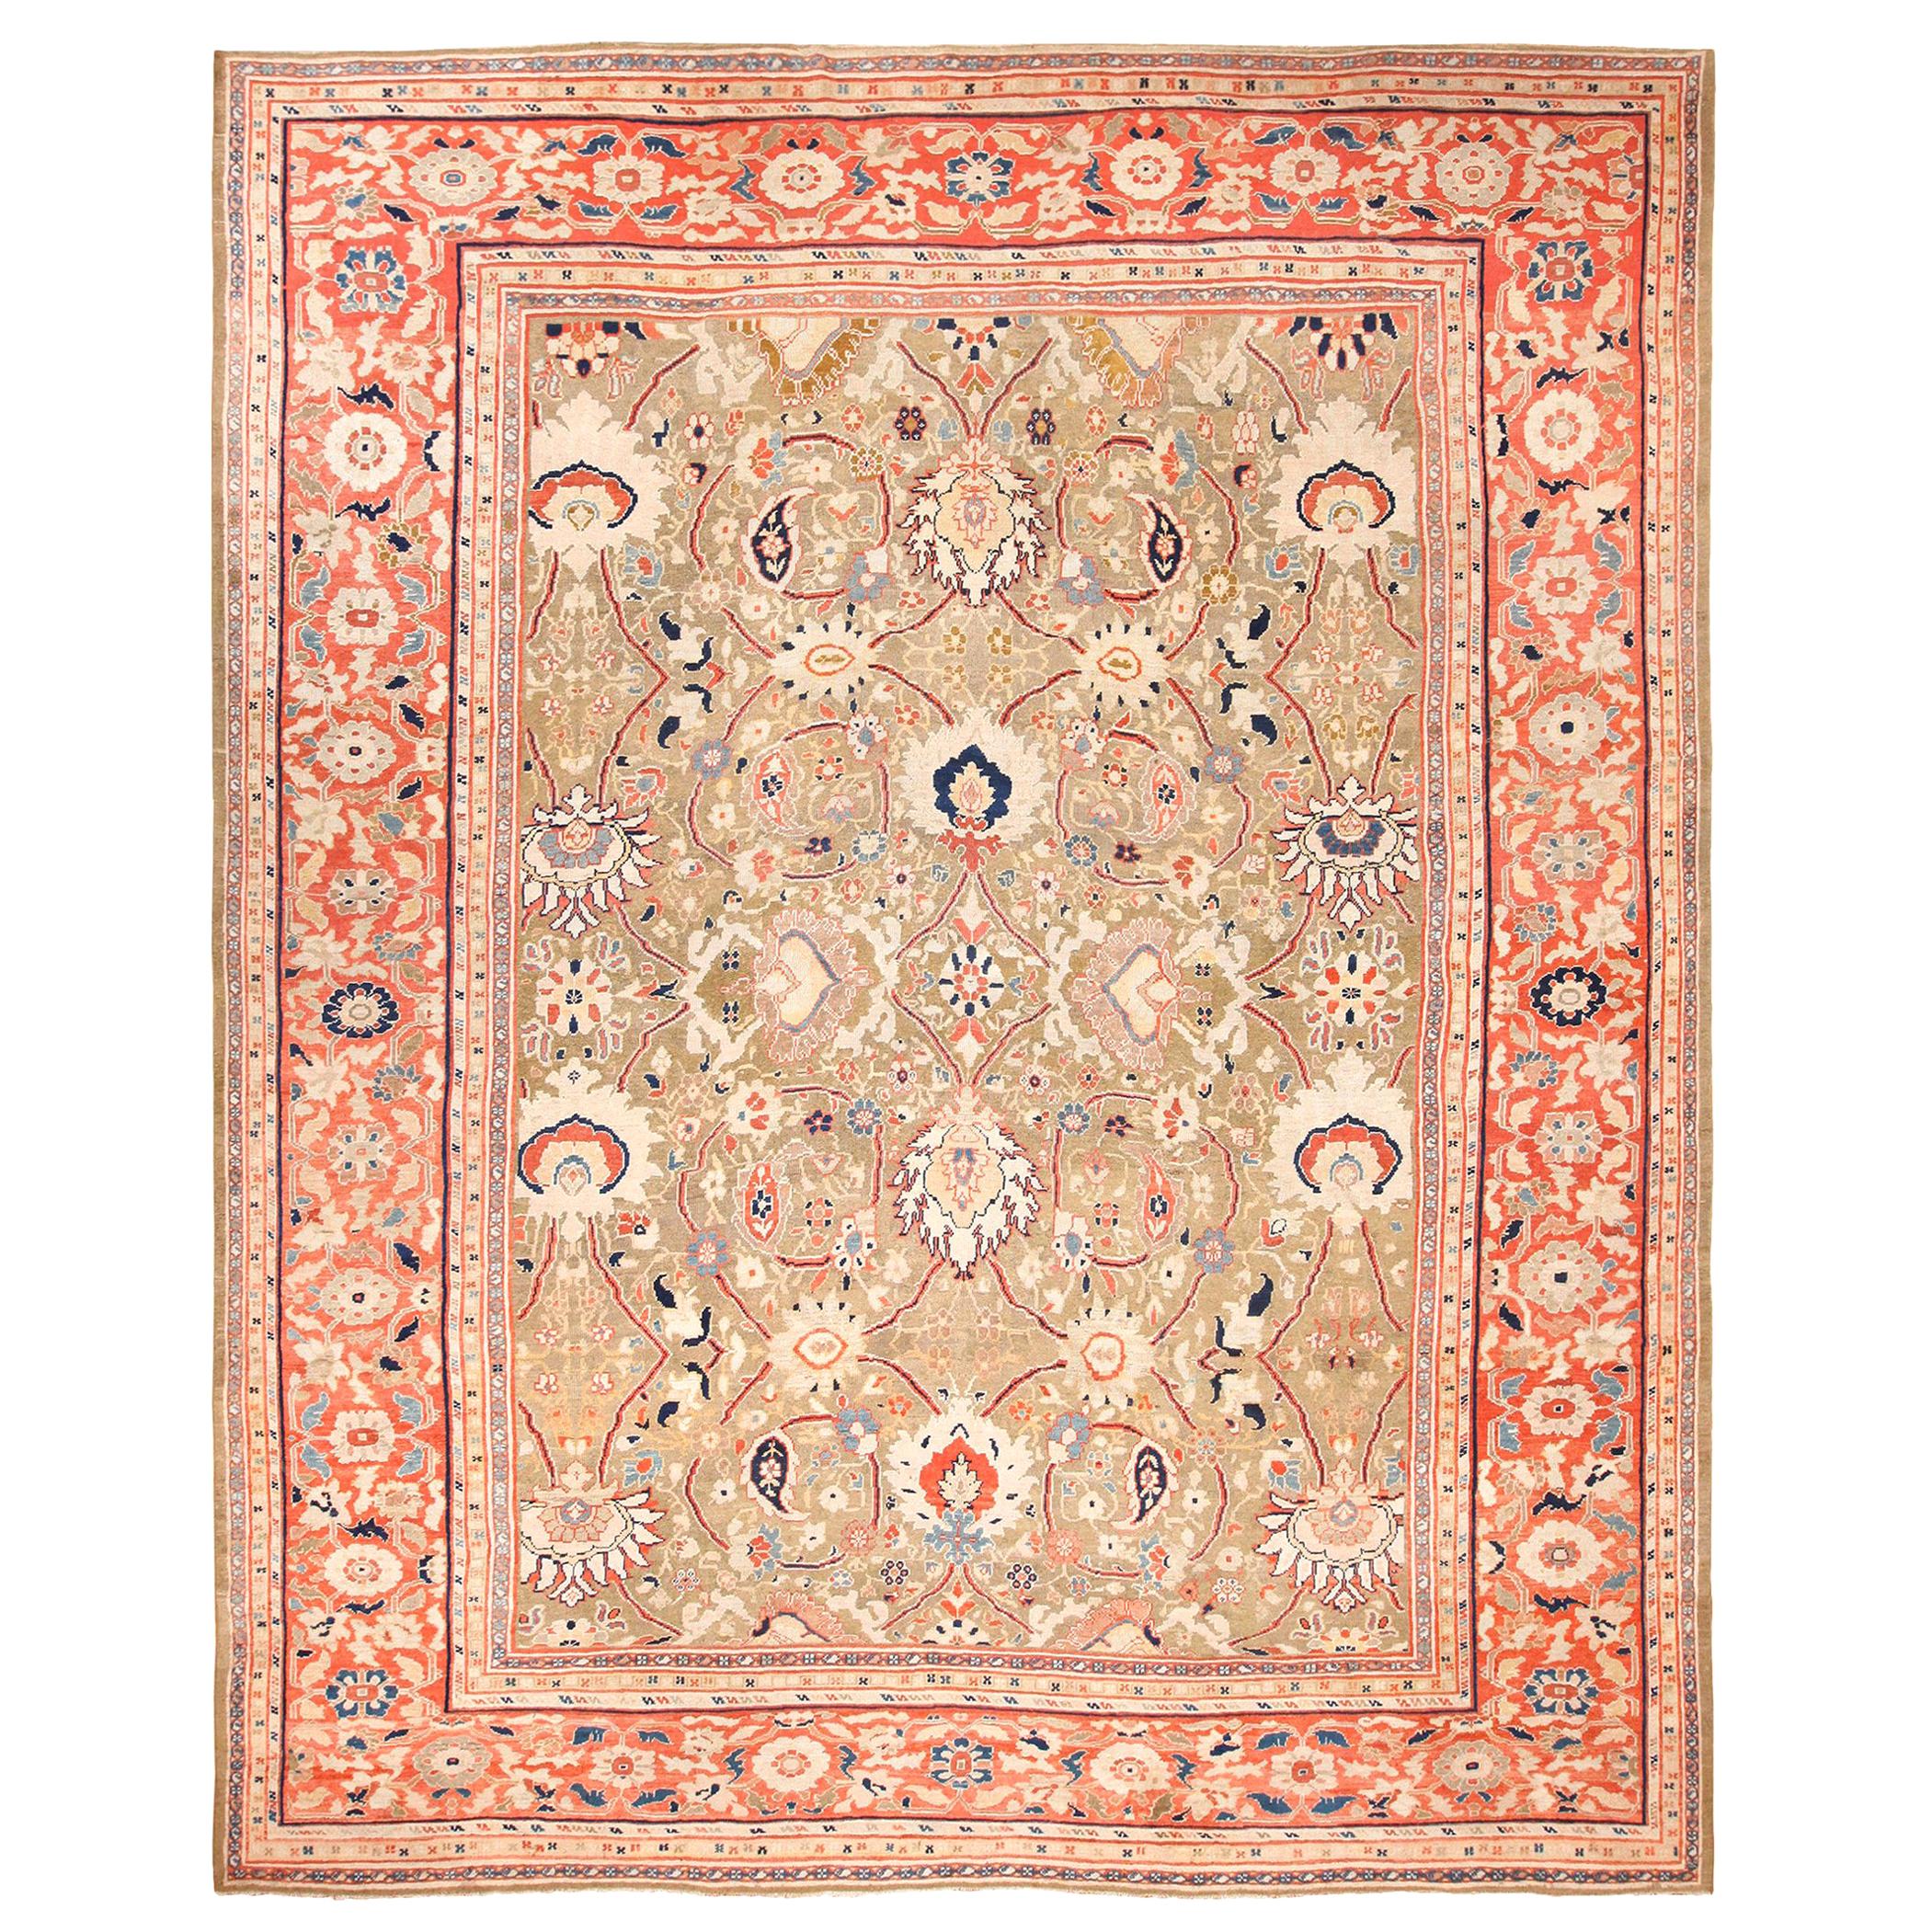 Antique Ziegler Sultanabad Persian Rug. Size: 13 ft 3 in x 16 ft 3 in 